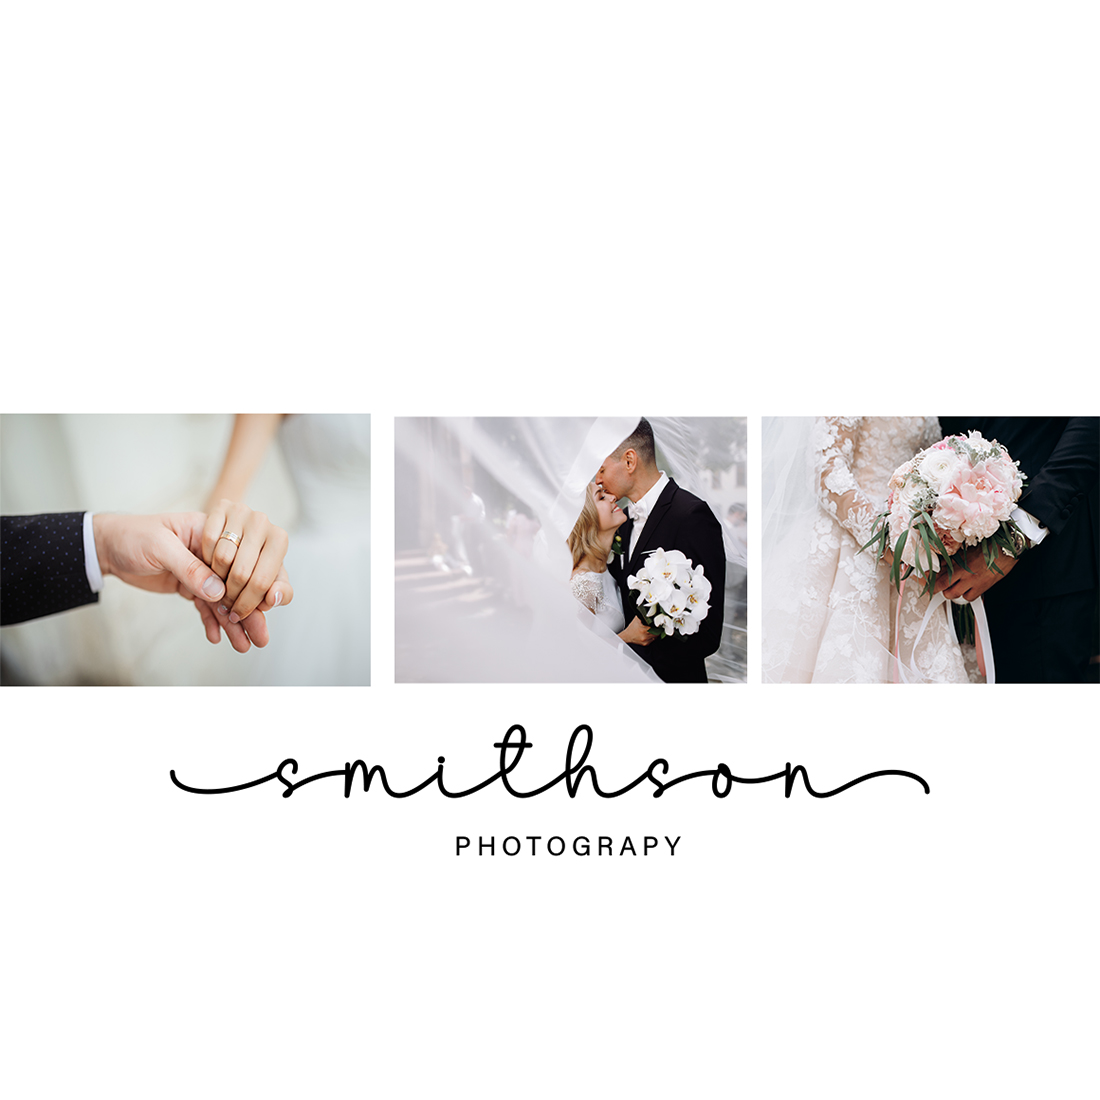 Collage of photos of a bride and groom.